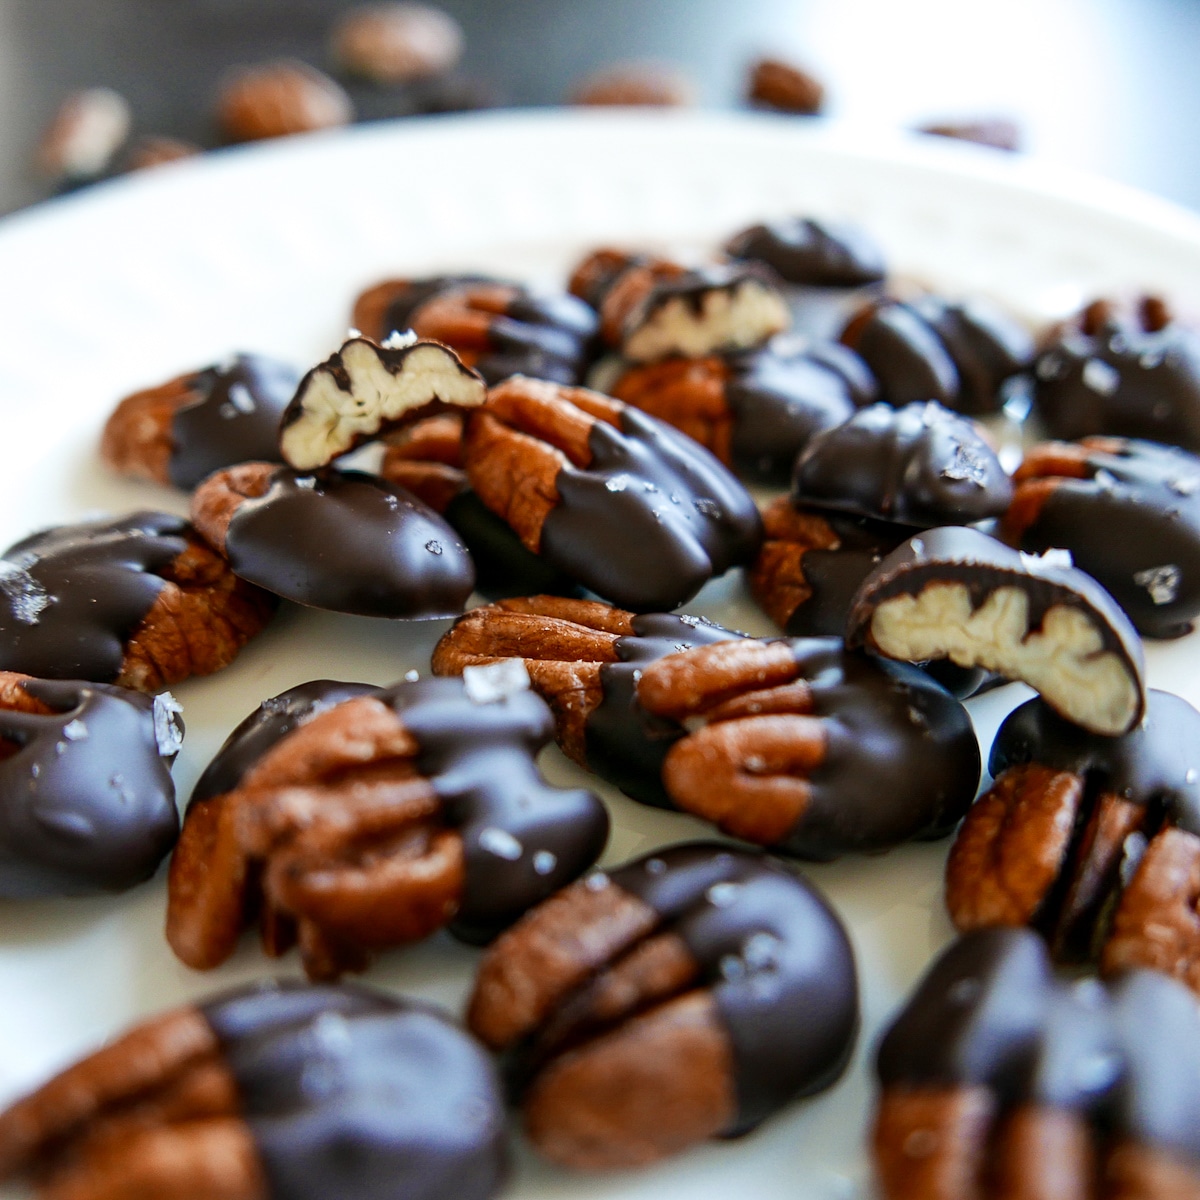 Chocolate covered pecans broken in half and arranged on a white plate.